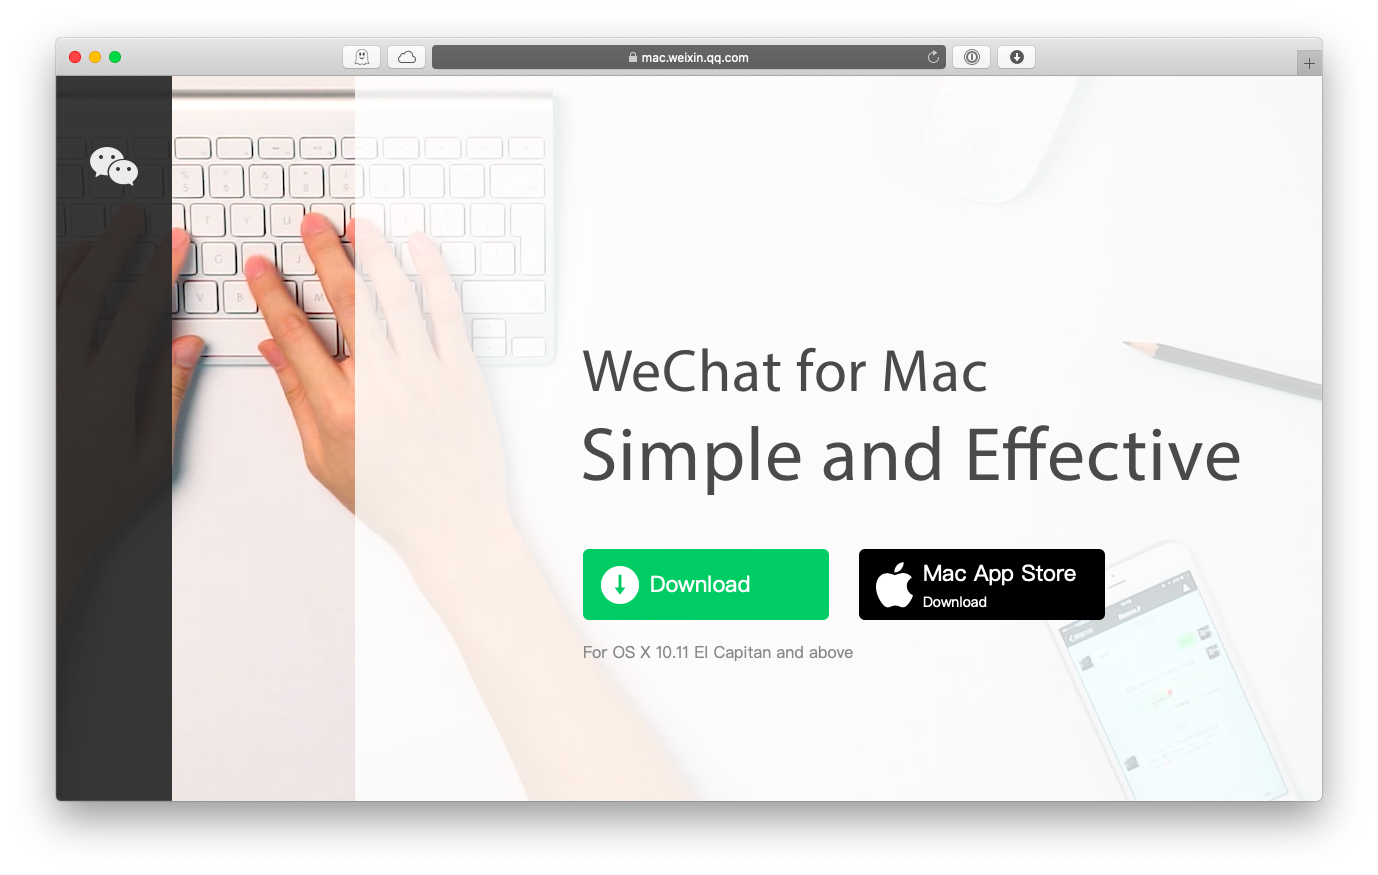 wechat for mac video call